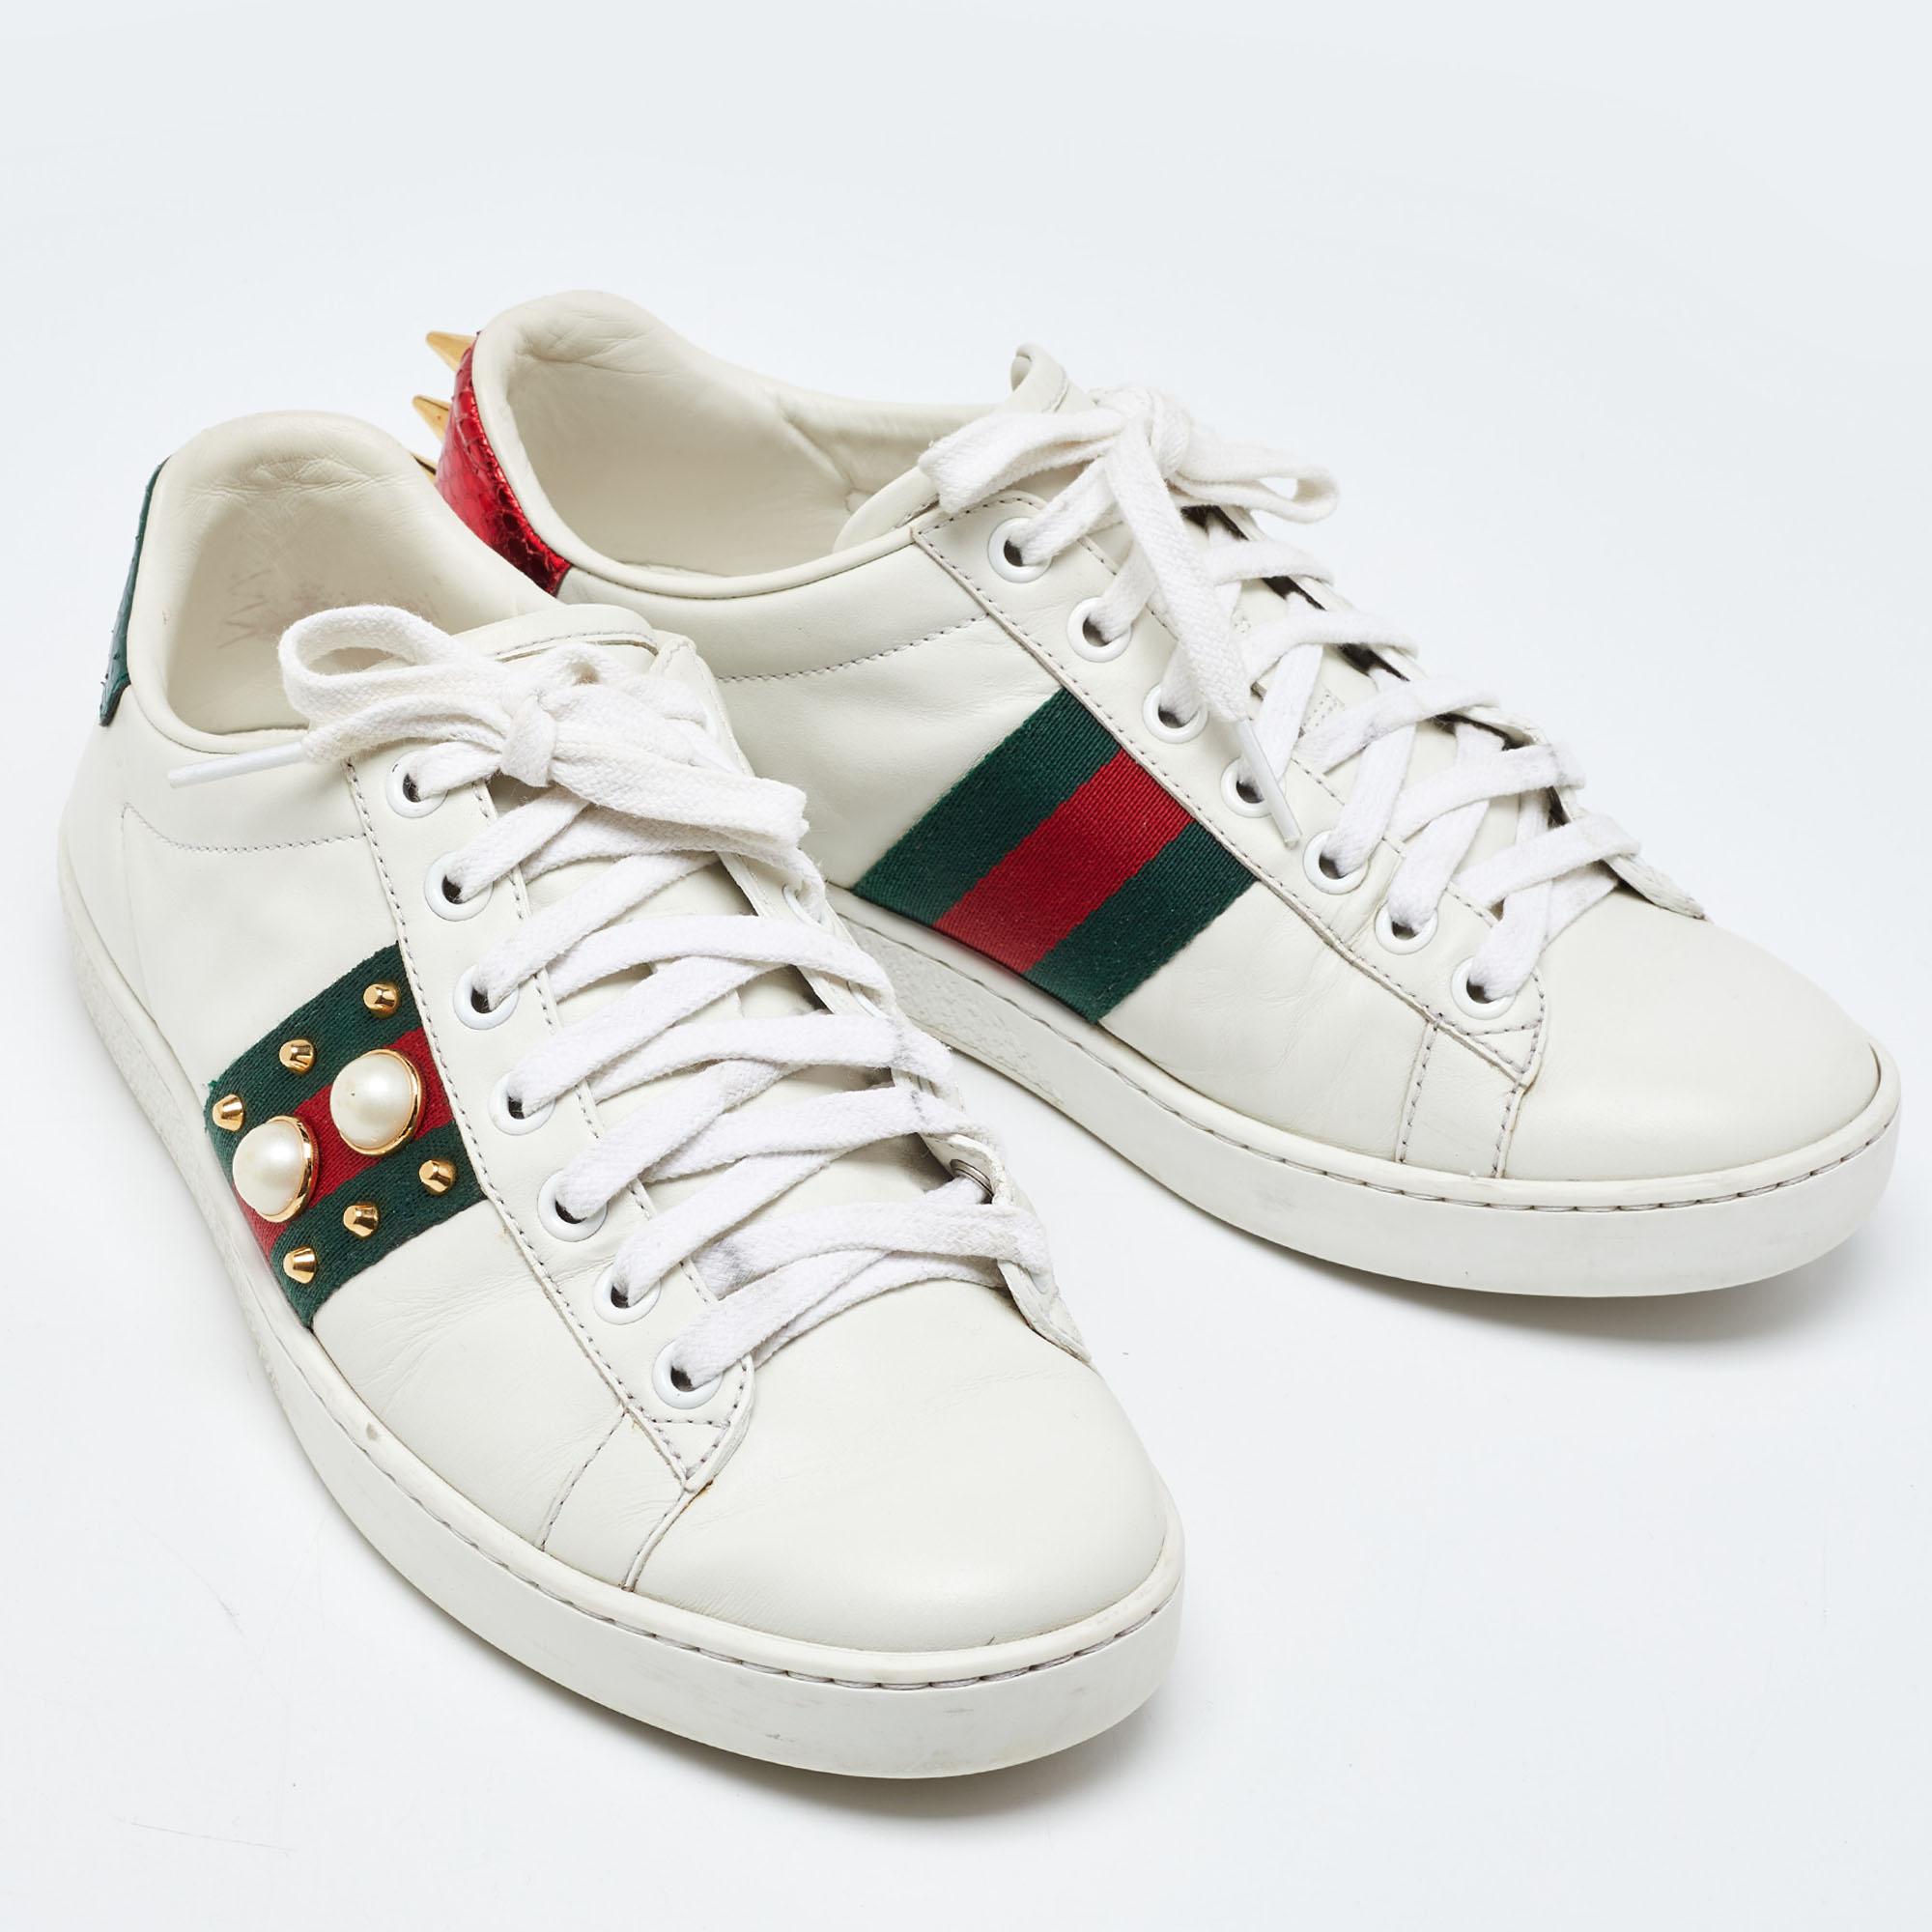 Gucci White Leather Studded and Spiked Ace Sneakers Size 36 For Sale 2